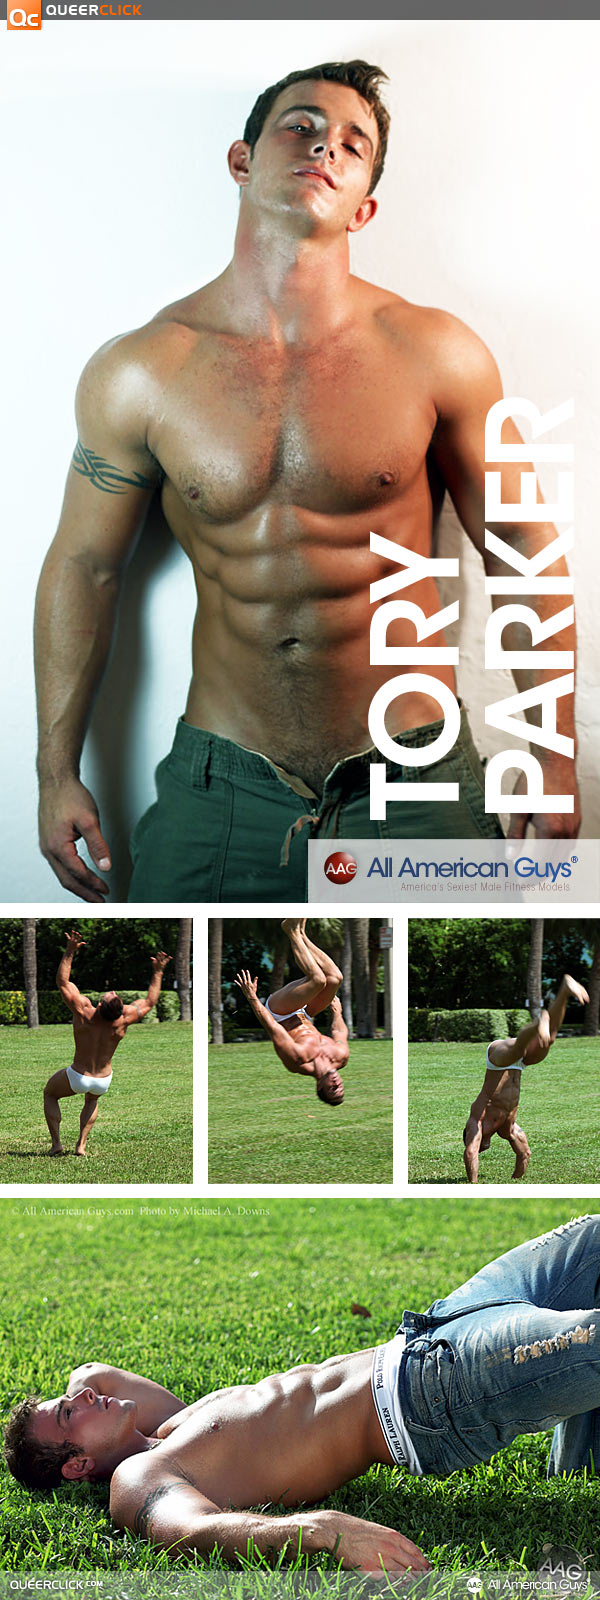 All American Guys: Tory Parker